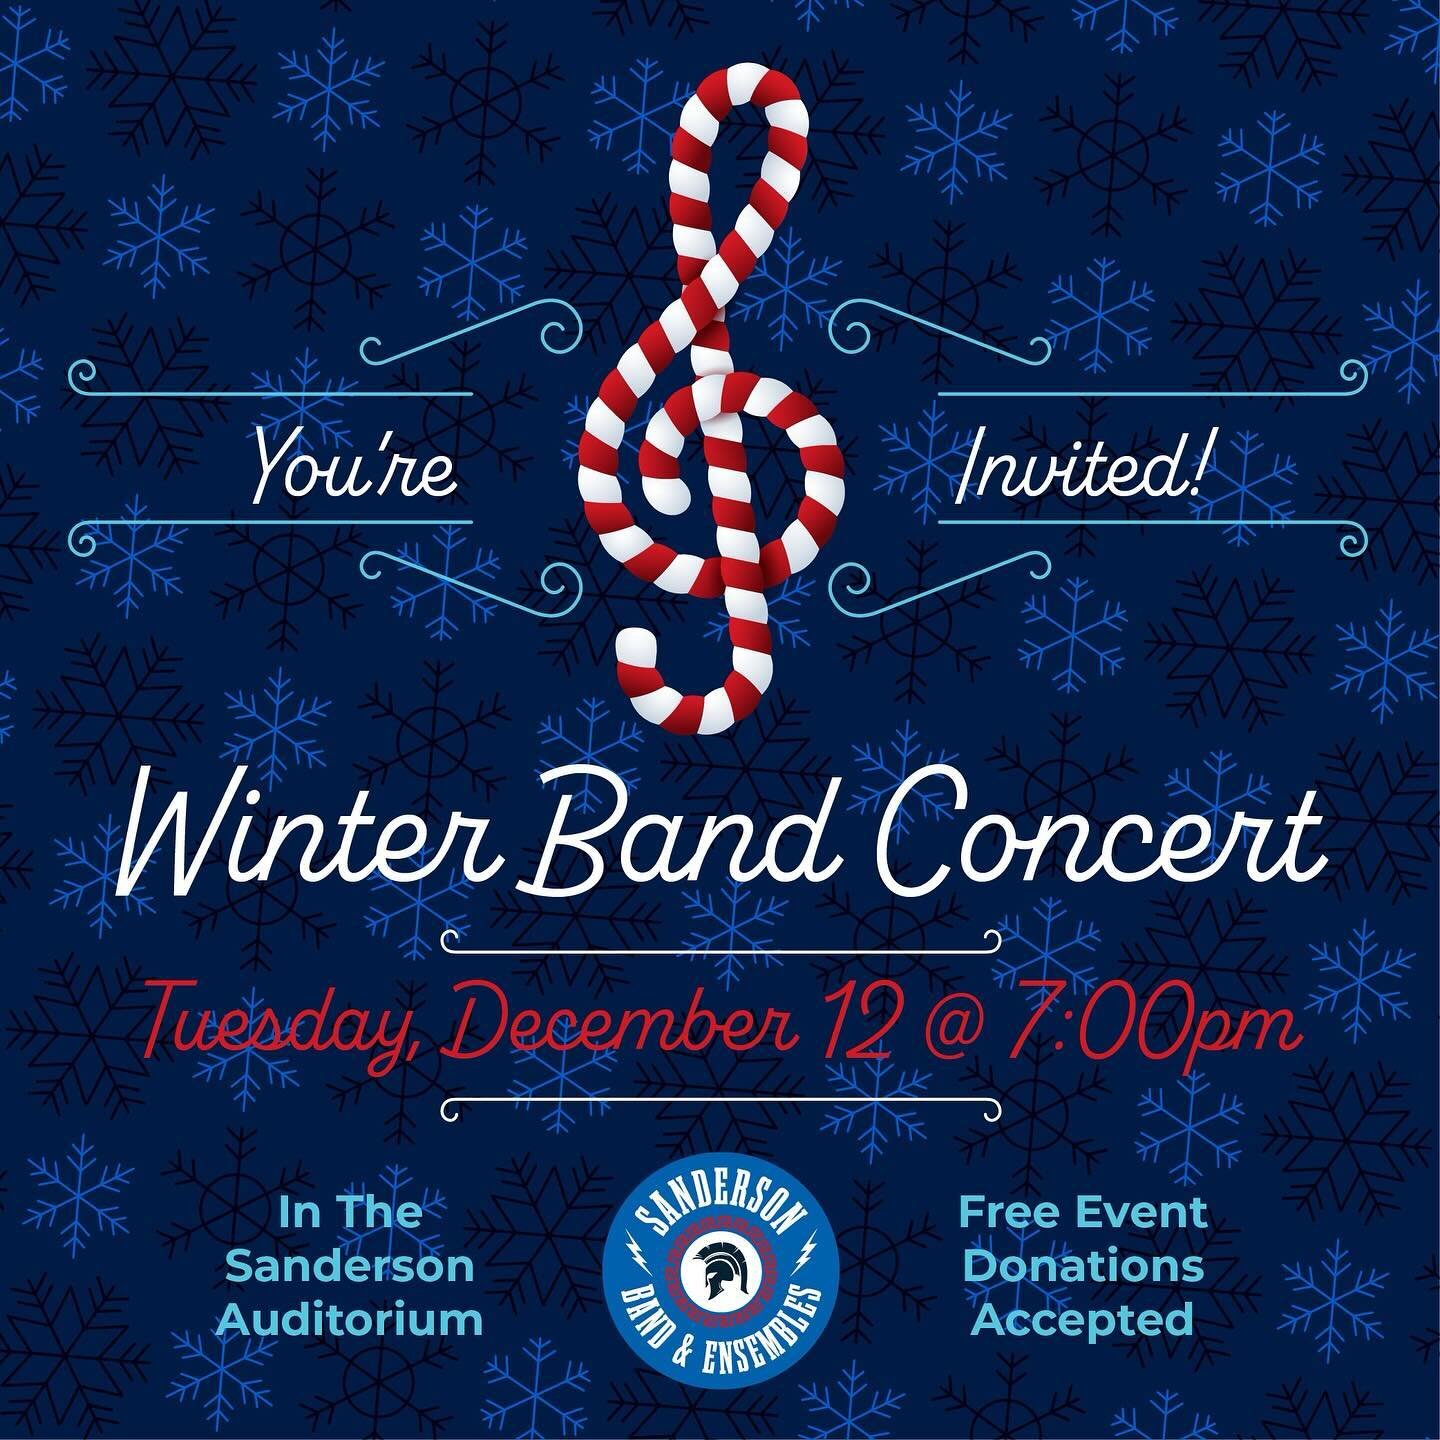 Happy holidays from the Sanderson band! Come join us for a festive night with some fun holiday hits!